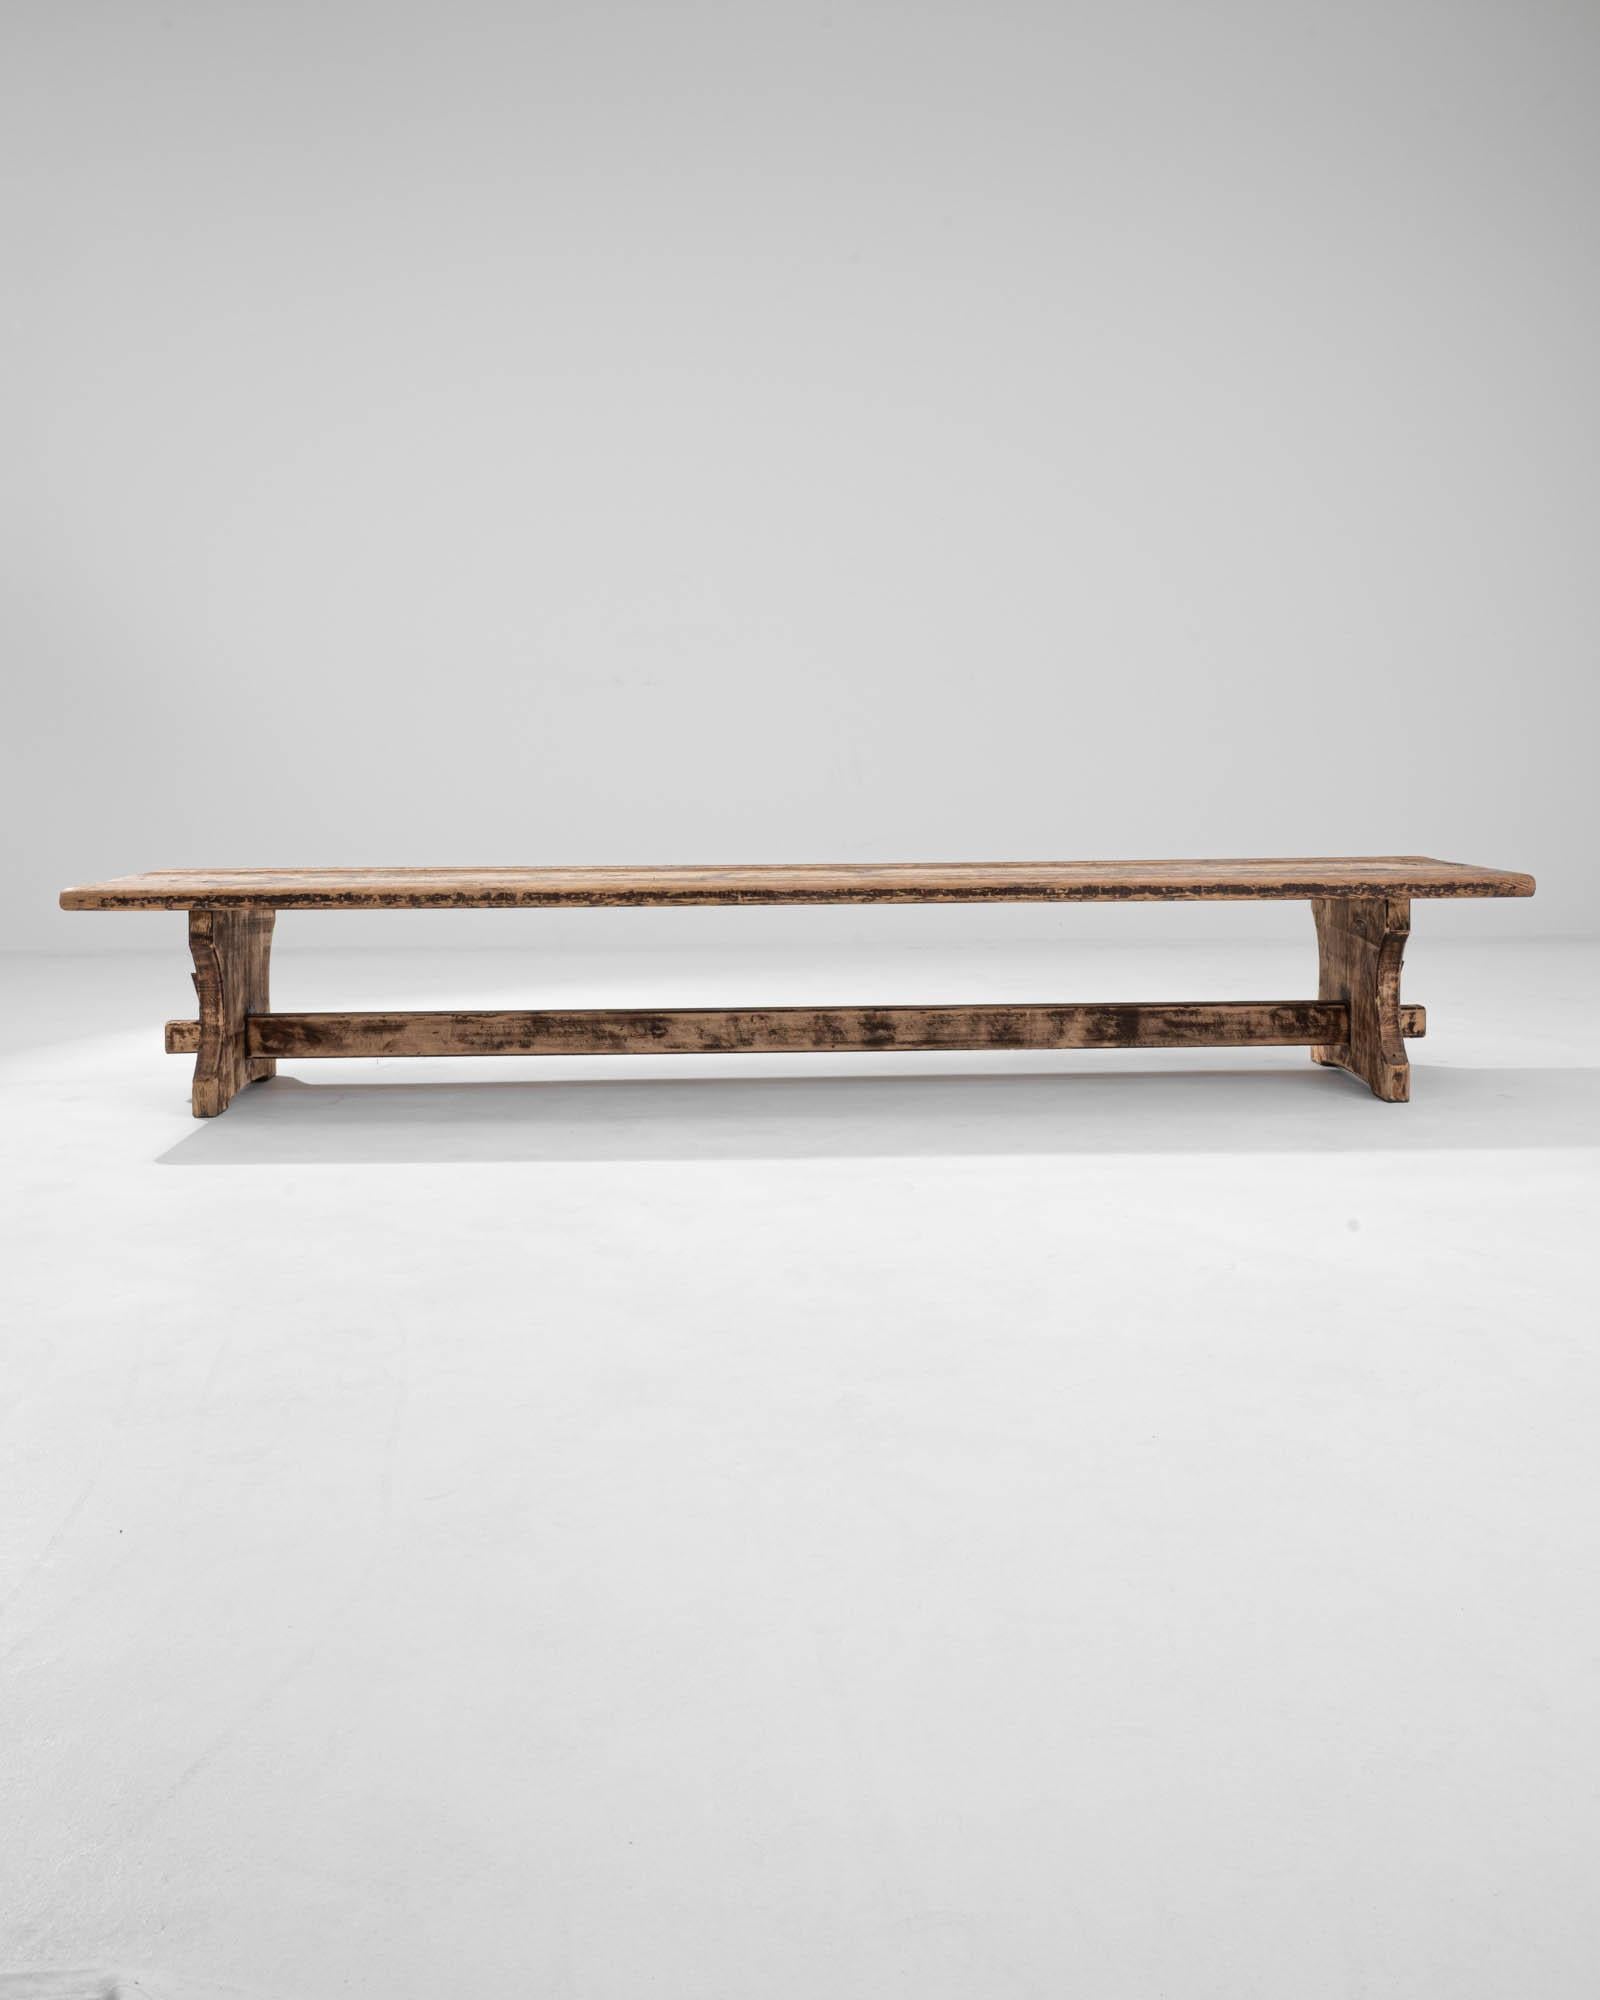 French Provincial Early 20th Century French Wooden Bench